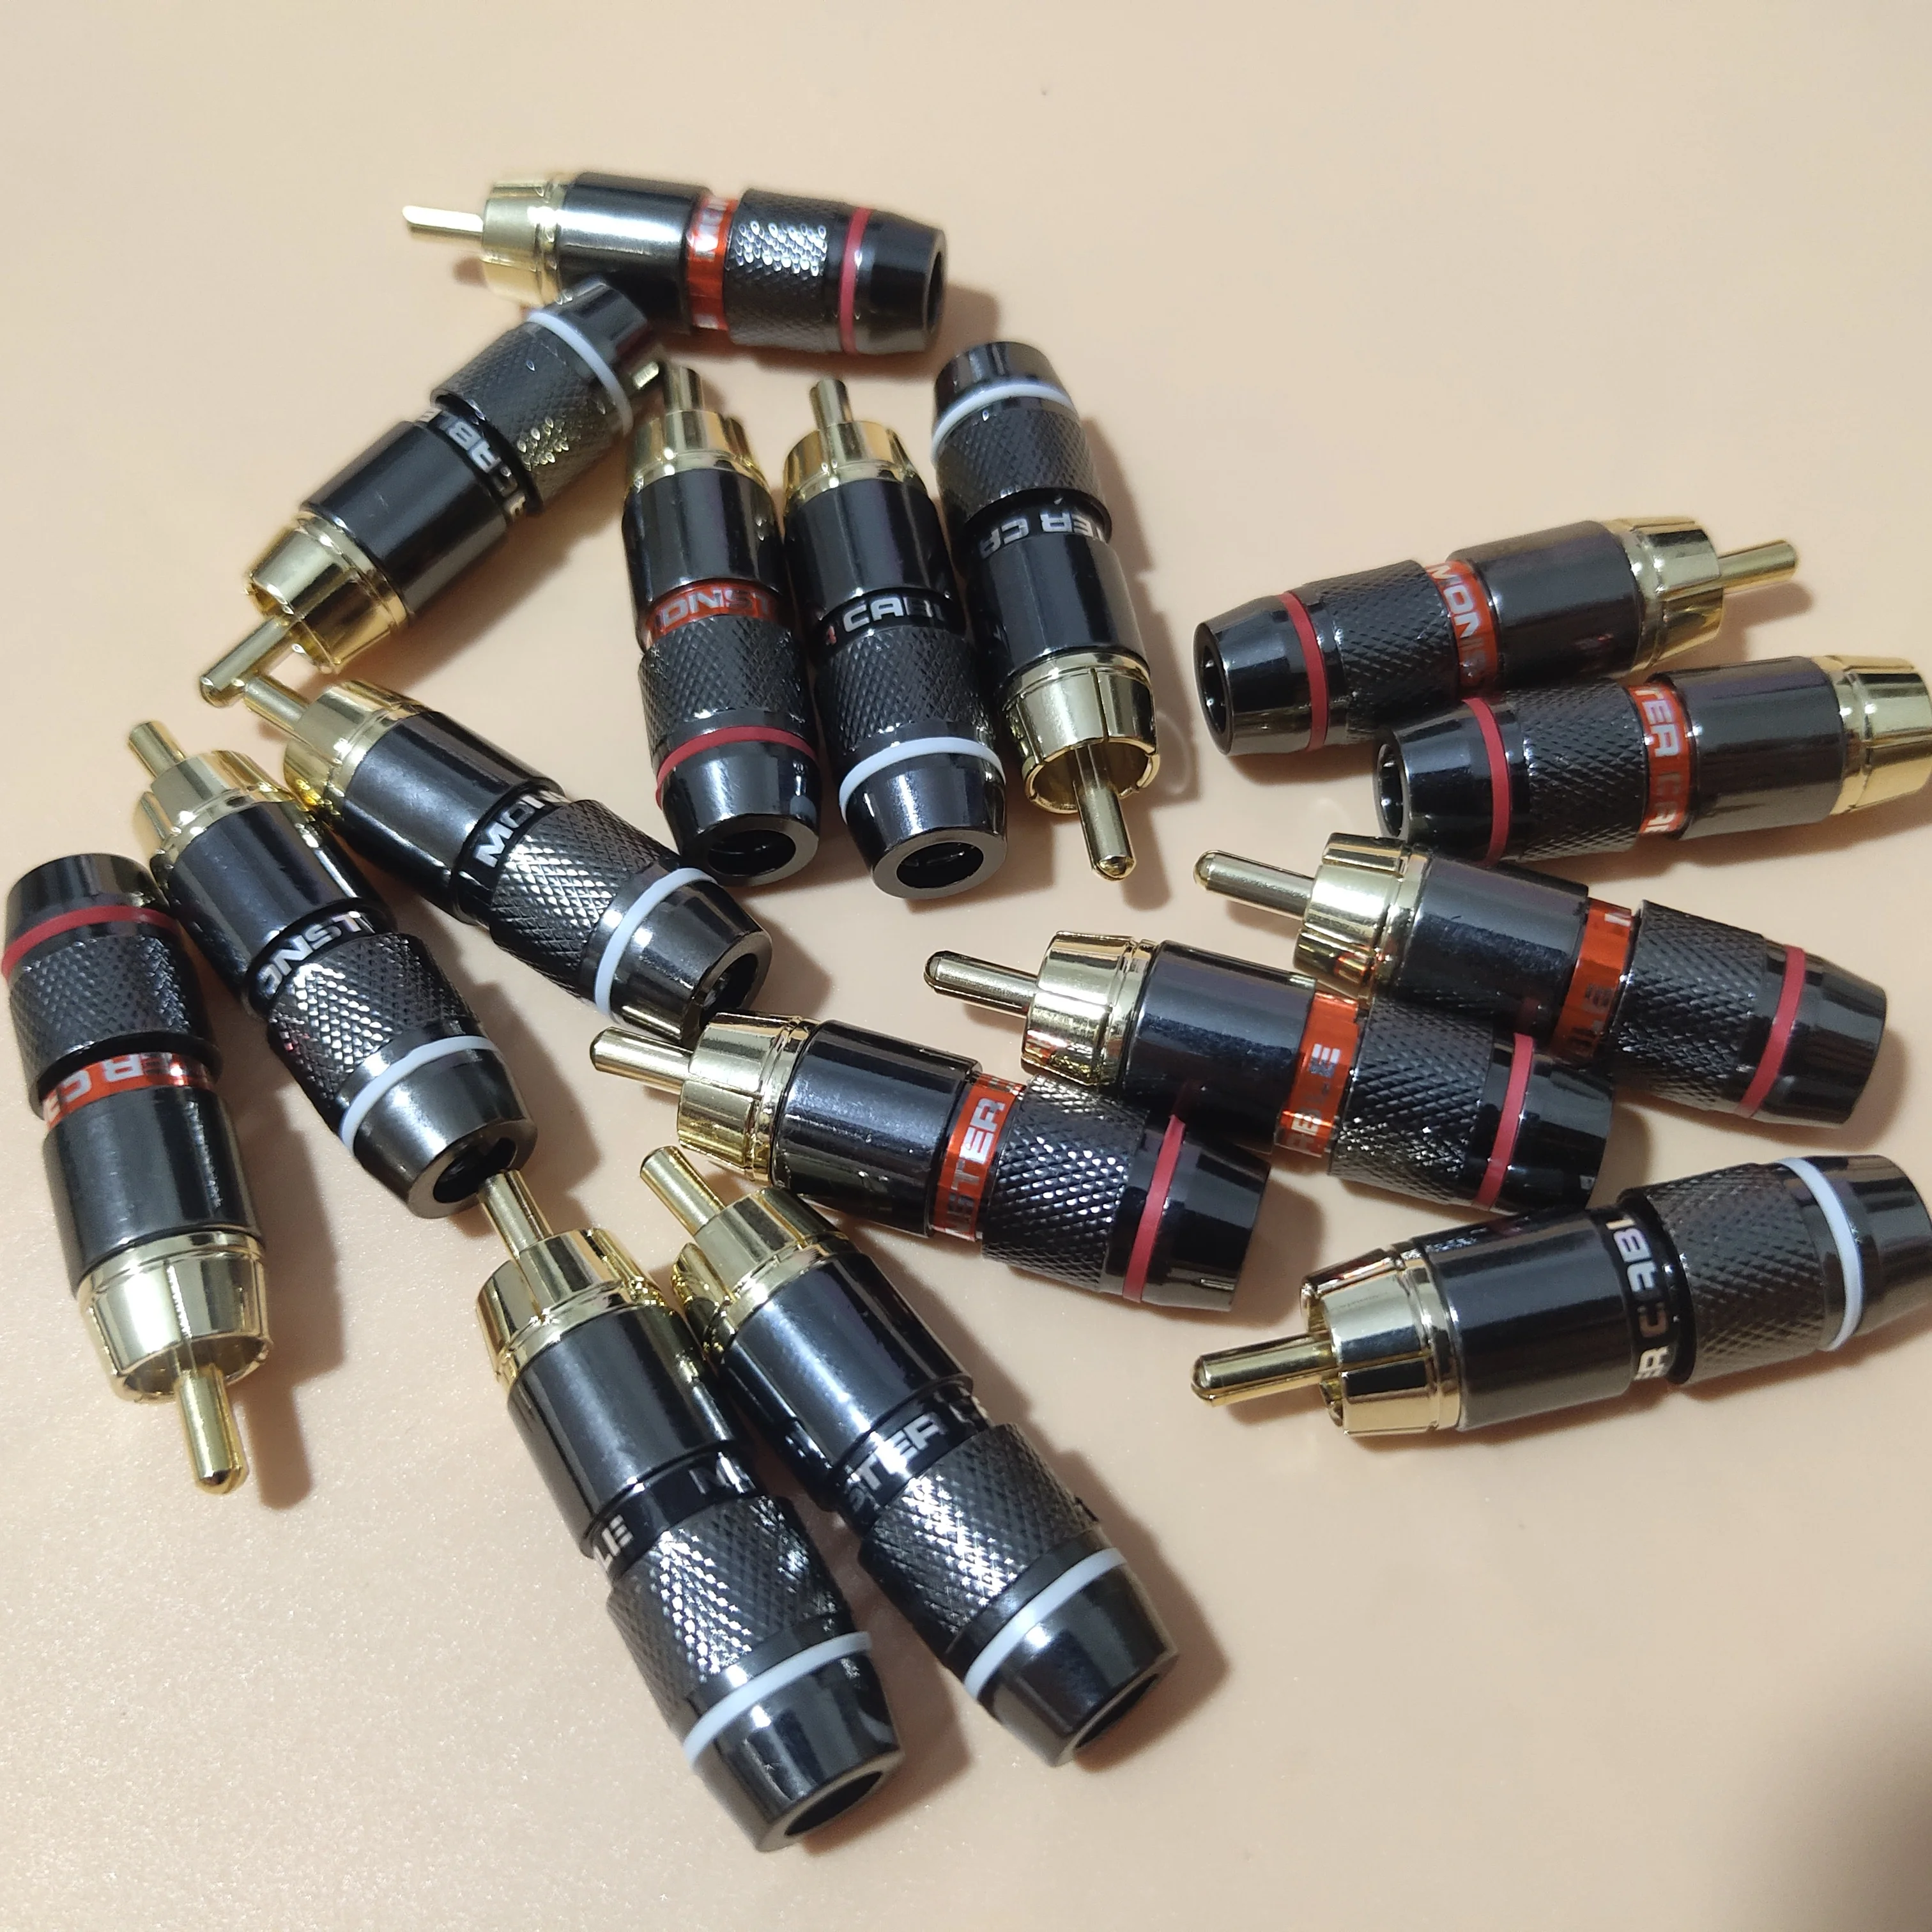 

New 50Pcs/lot Monster RCA Connector plug 6mm 24K Gold Plated Professional Speaker Audio Adapter Wire lotus Male Plug